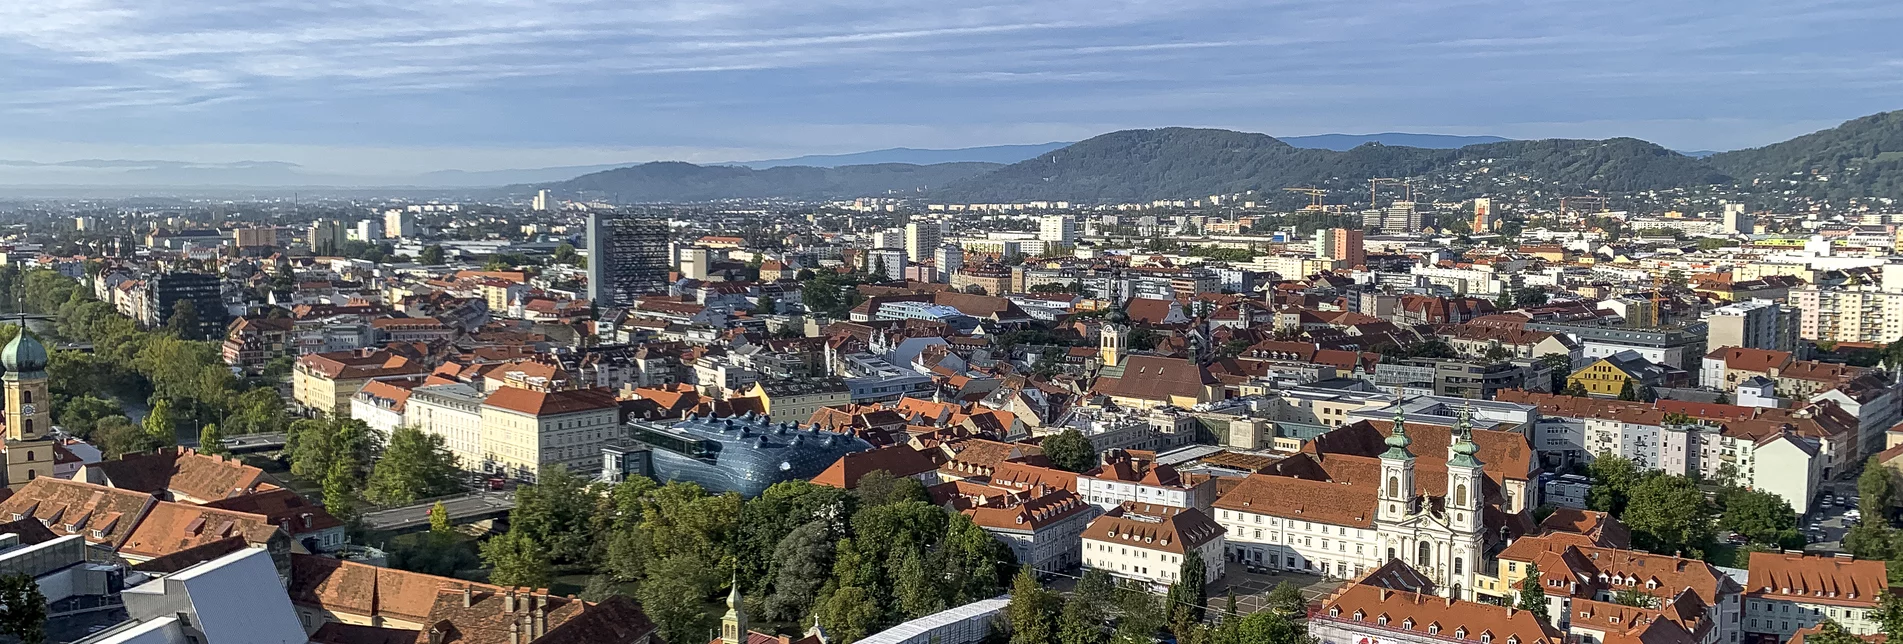 PackageThe cultural and creative view of Graz - Culture, pleasure and interesting Graz stories 